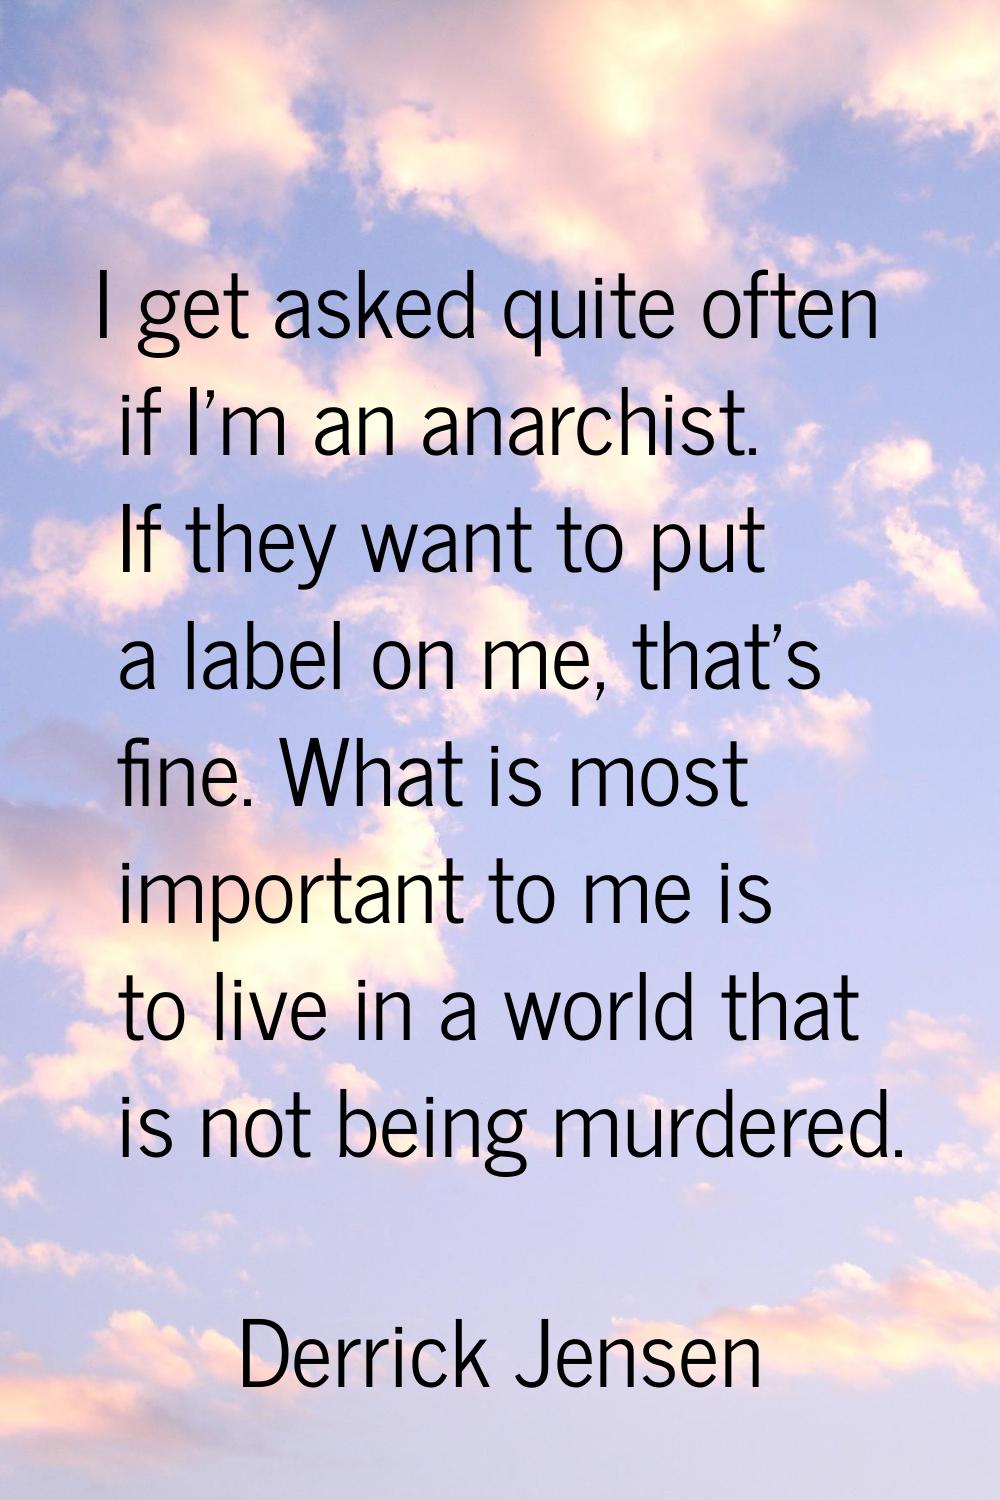 I get asked quite often if I'm an anarchist. If they want to put a label on me, that's fine. What i